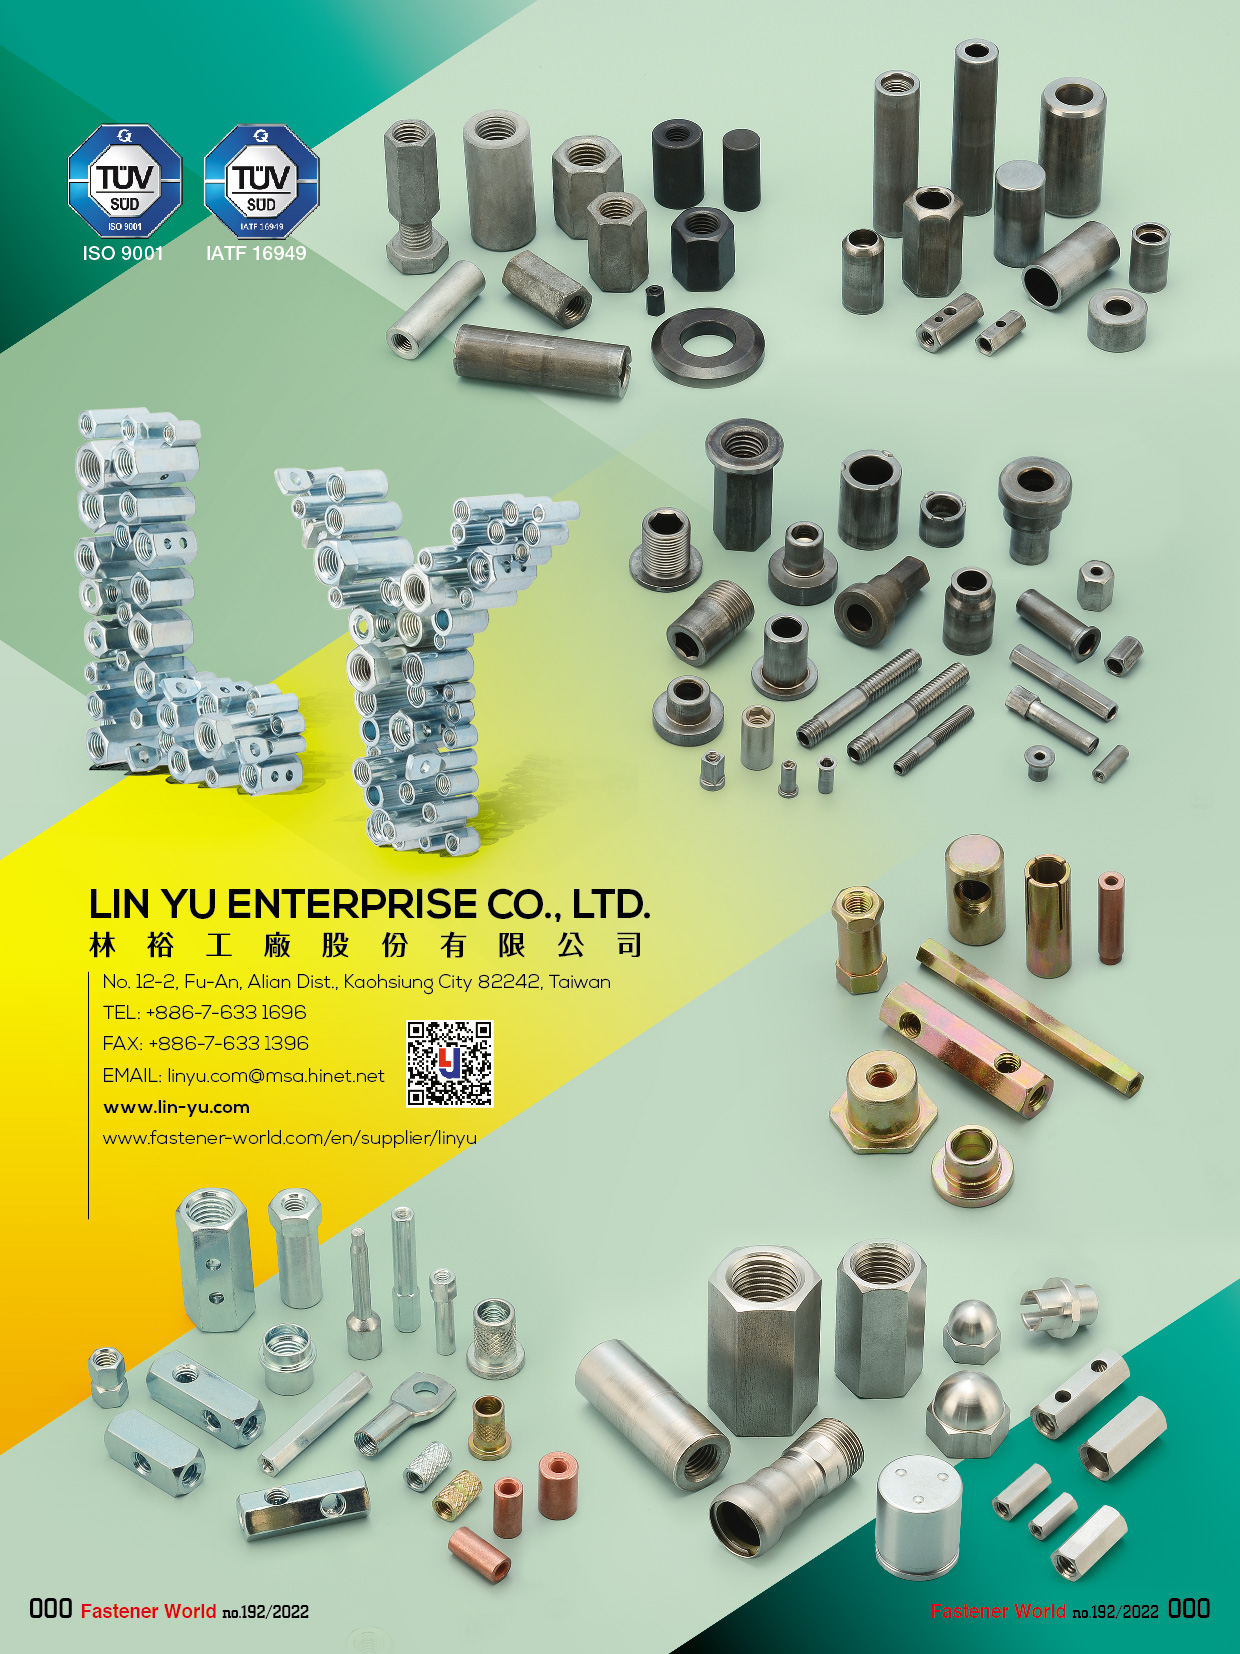 LIN YU ENTERPRISE CO., LTD.  , Custom thru-hole parts to drawing, DIN 6334, coupling nuts, bushings, tubing, collars, spacers, inserts, fittings, reducer coupling nuts, coupling nuts with inspection holes , Special Parts